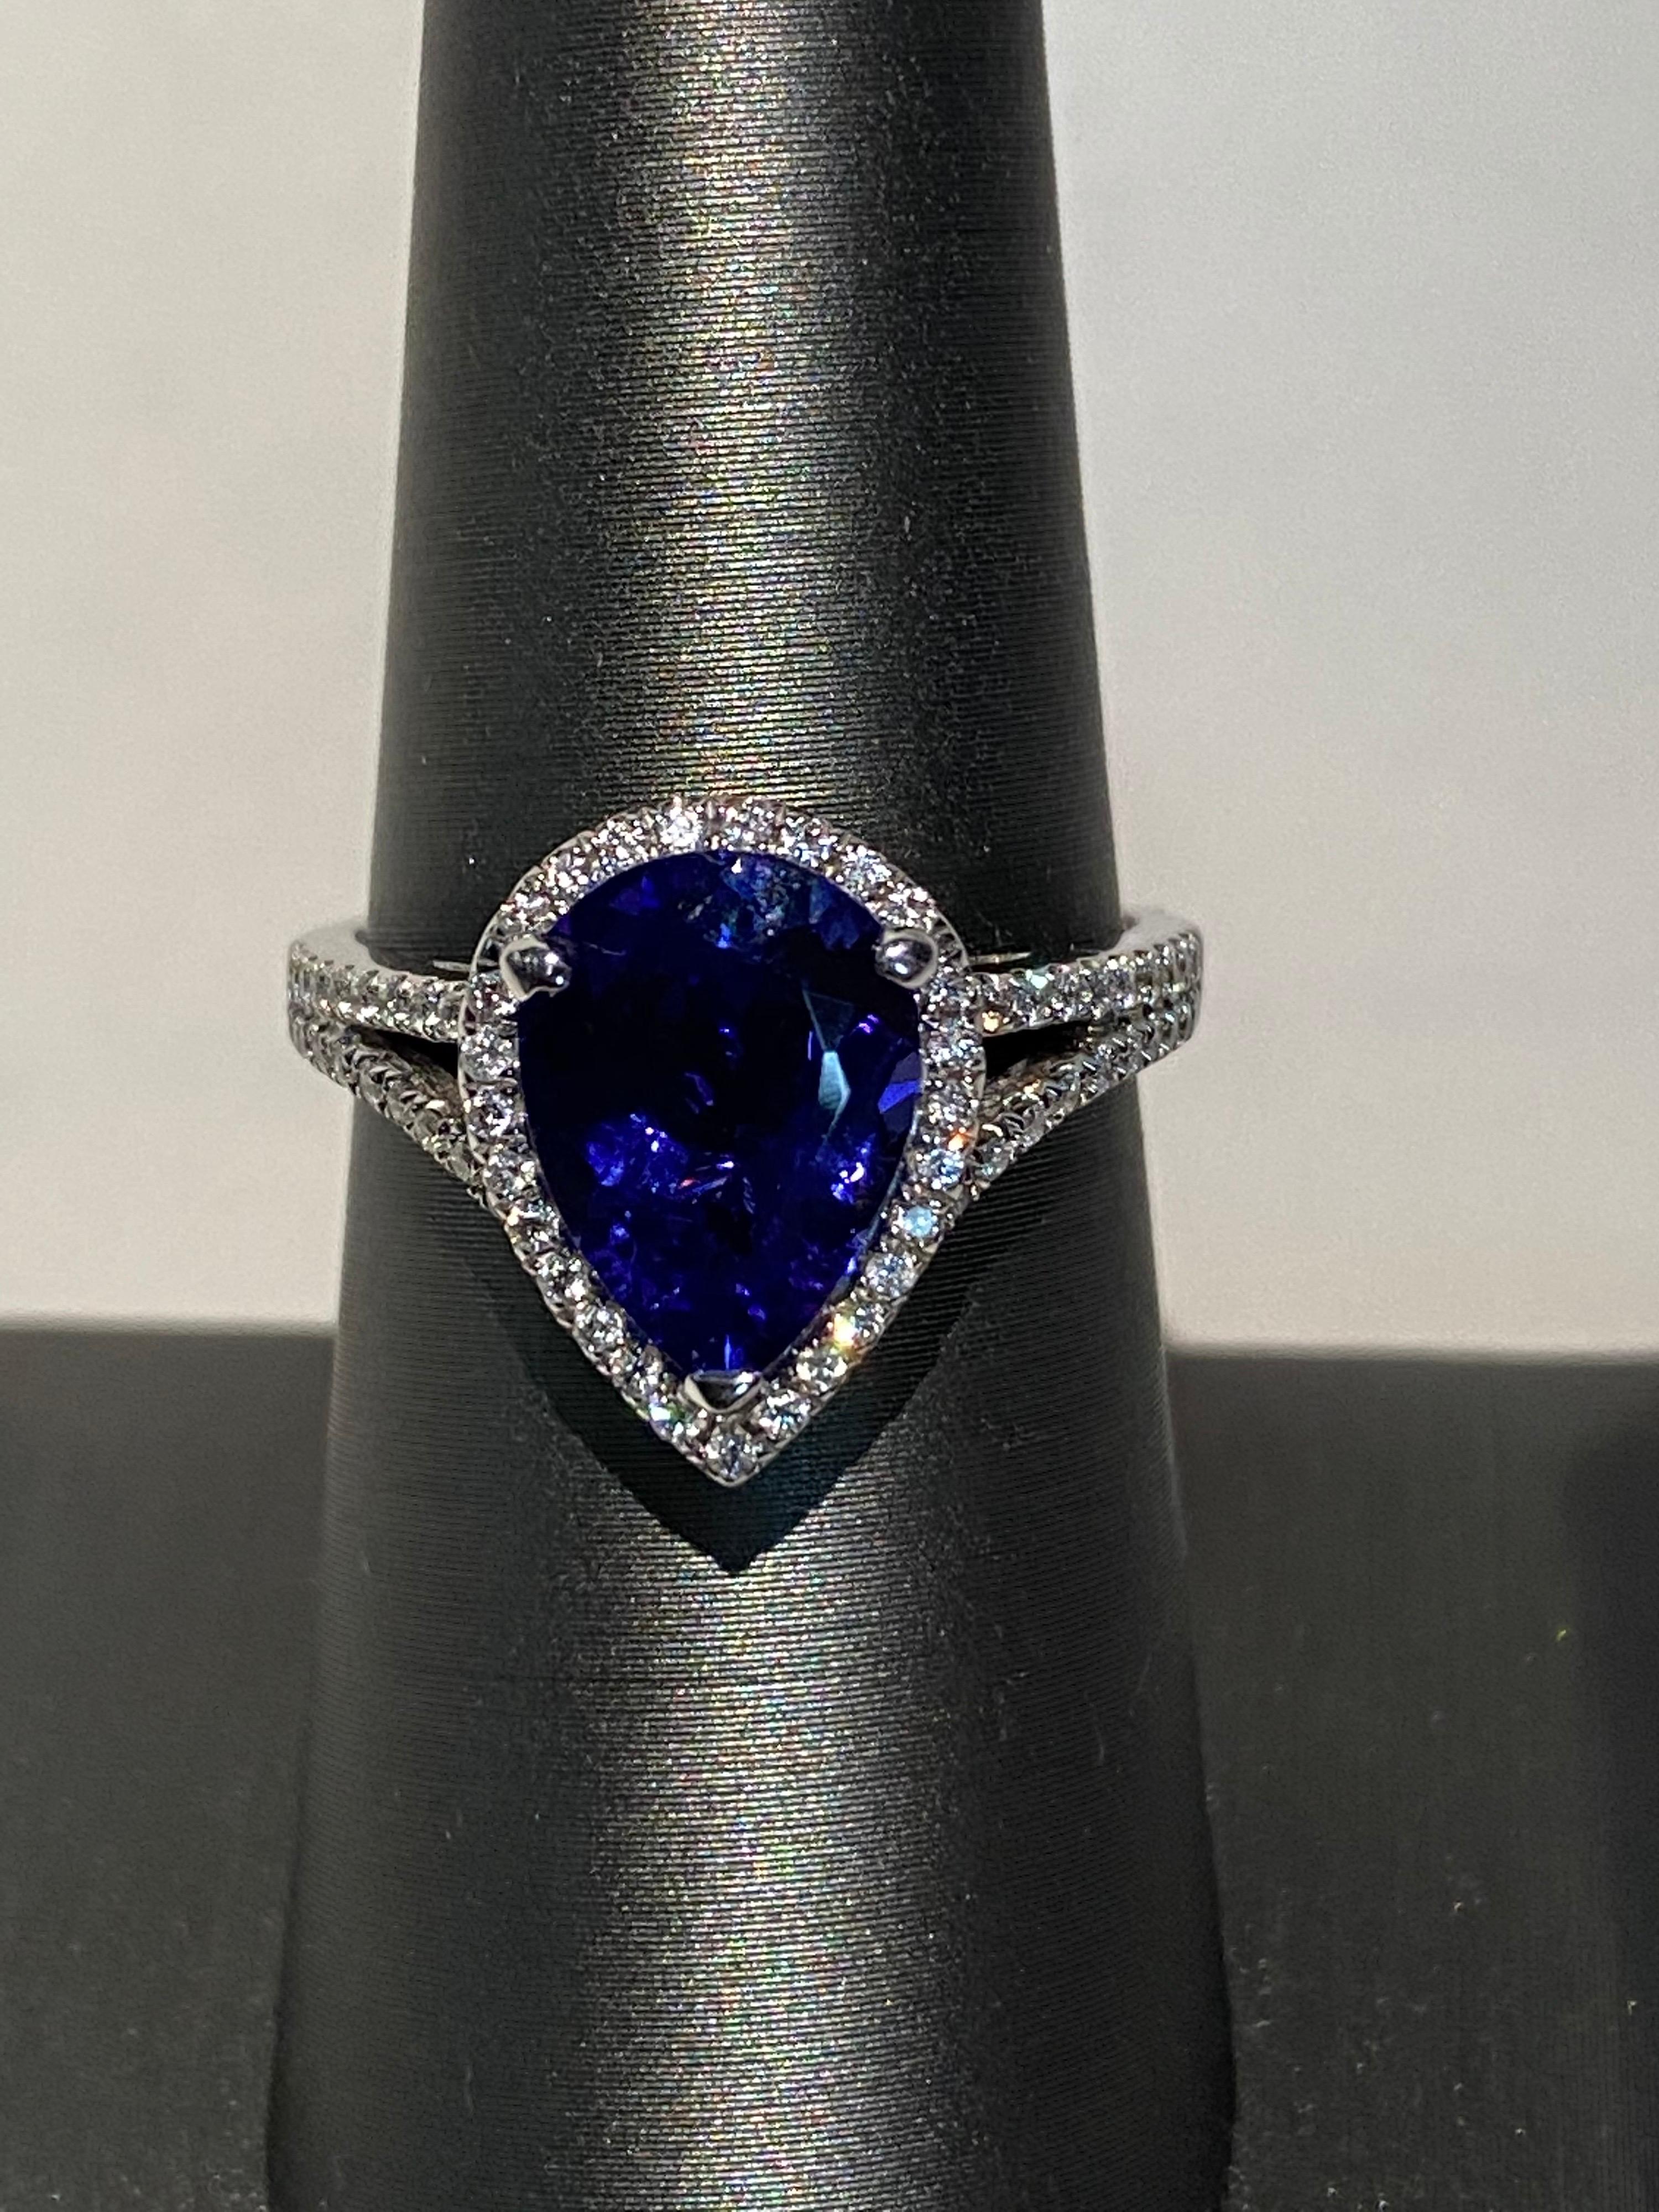 A pear shaped tanzanite is set in prongs and framed by a diamond halo. Band has two rows of diamond. Set in white gold and handcrafted. Diamond accents give the tanzanite ring an elegant stunning look. 
Tanzanite: 2.75ct
Diamond: 0.25ct
Gold: